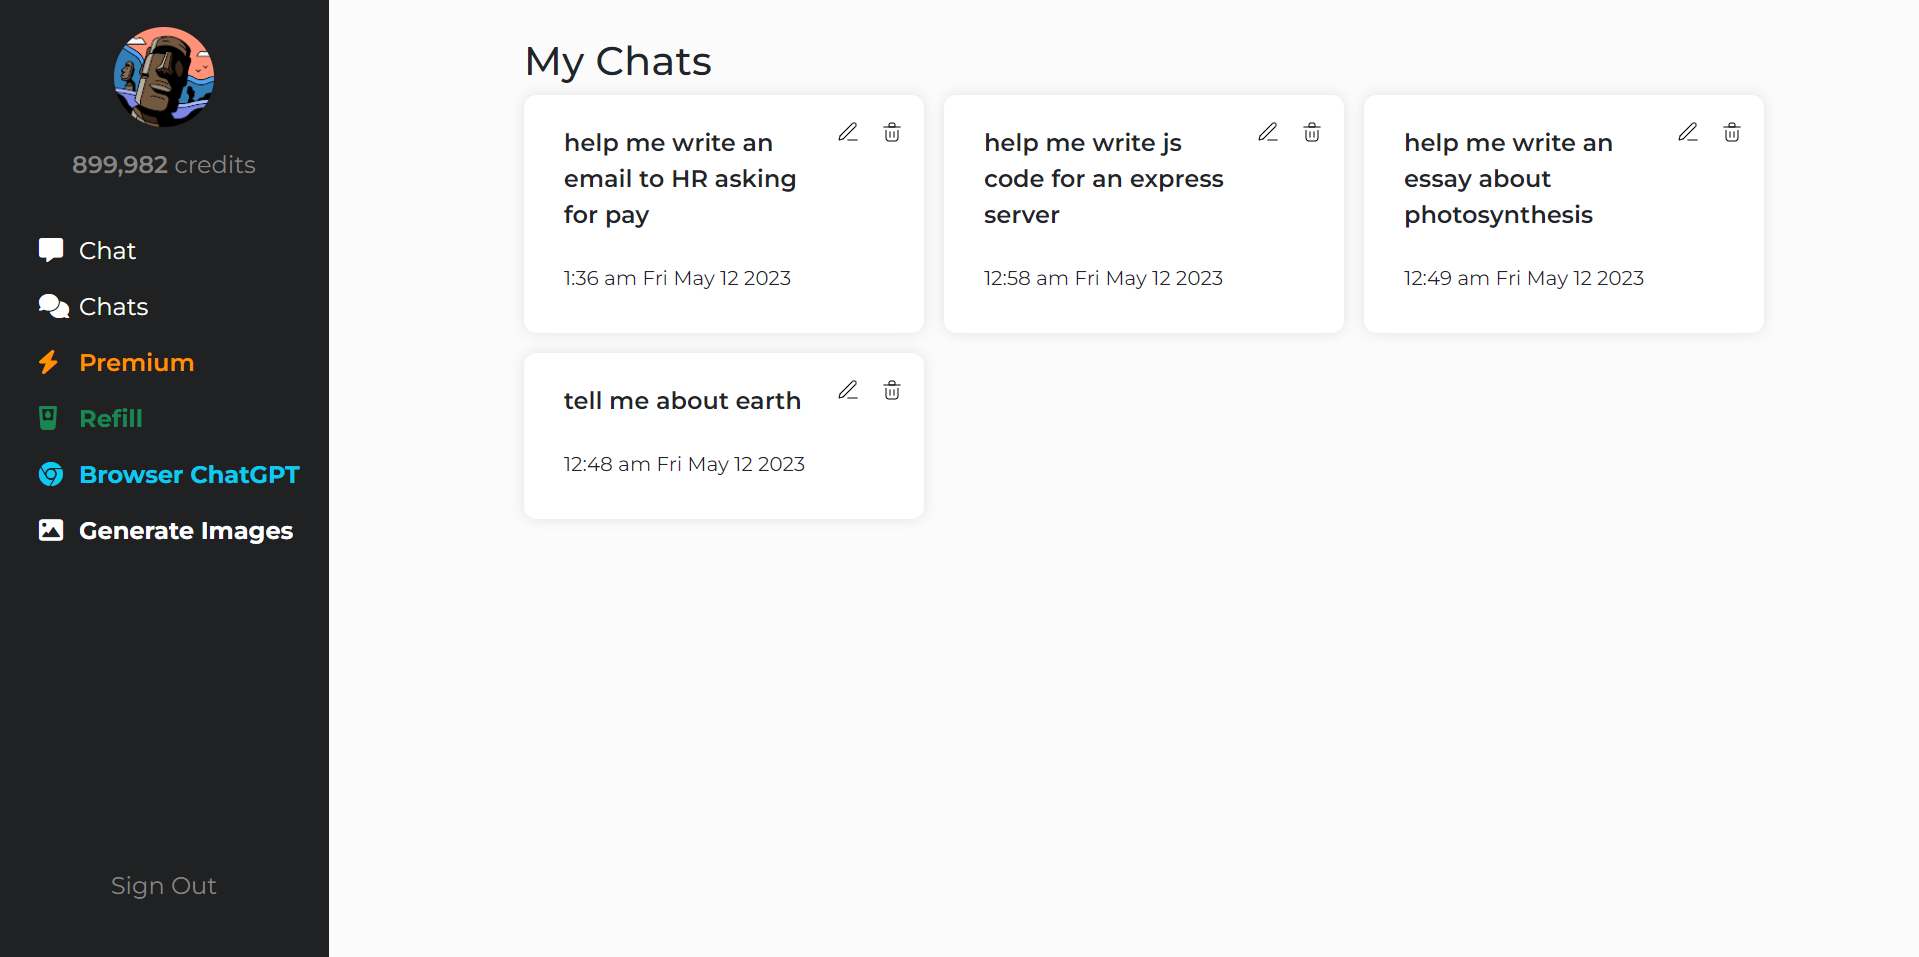 Chat AI Assistant - Ask Me Anything